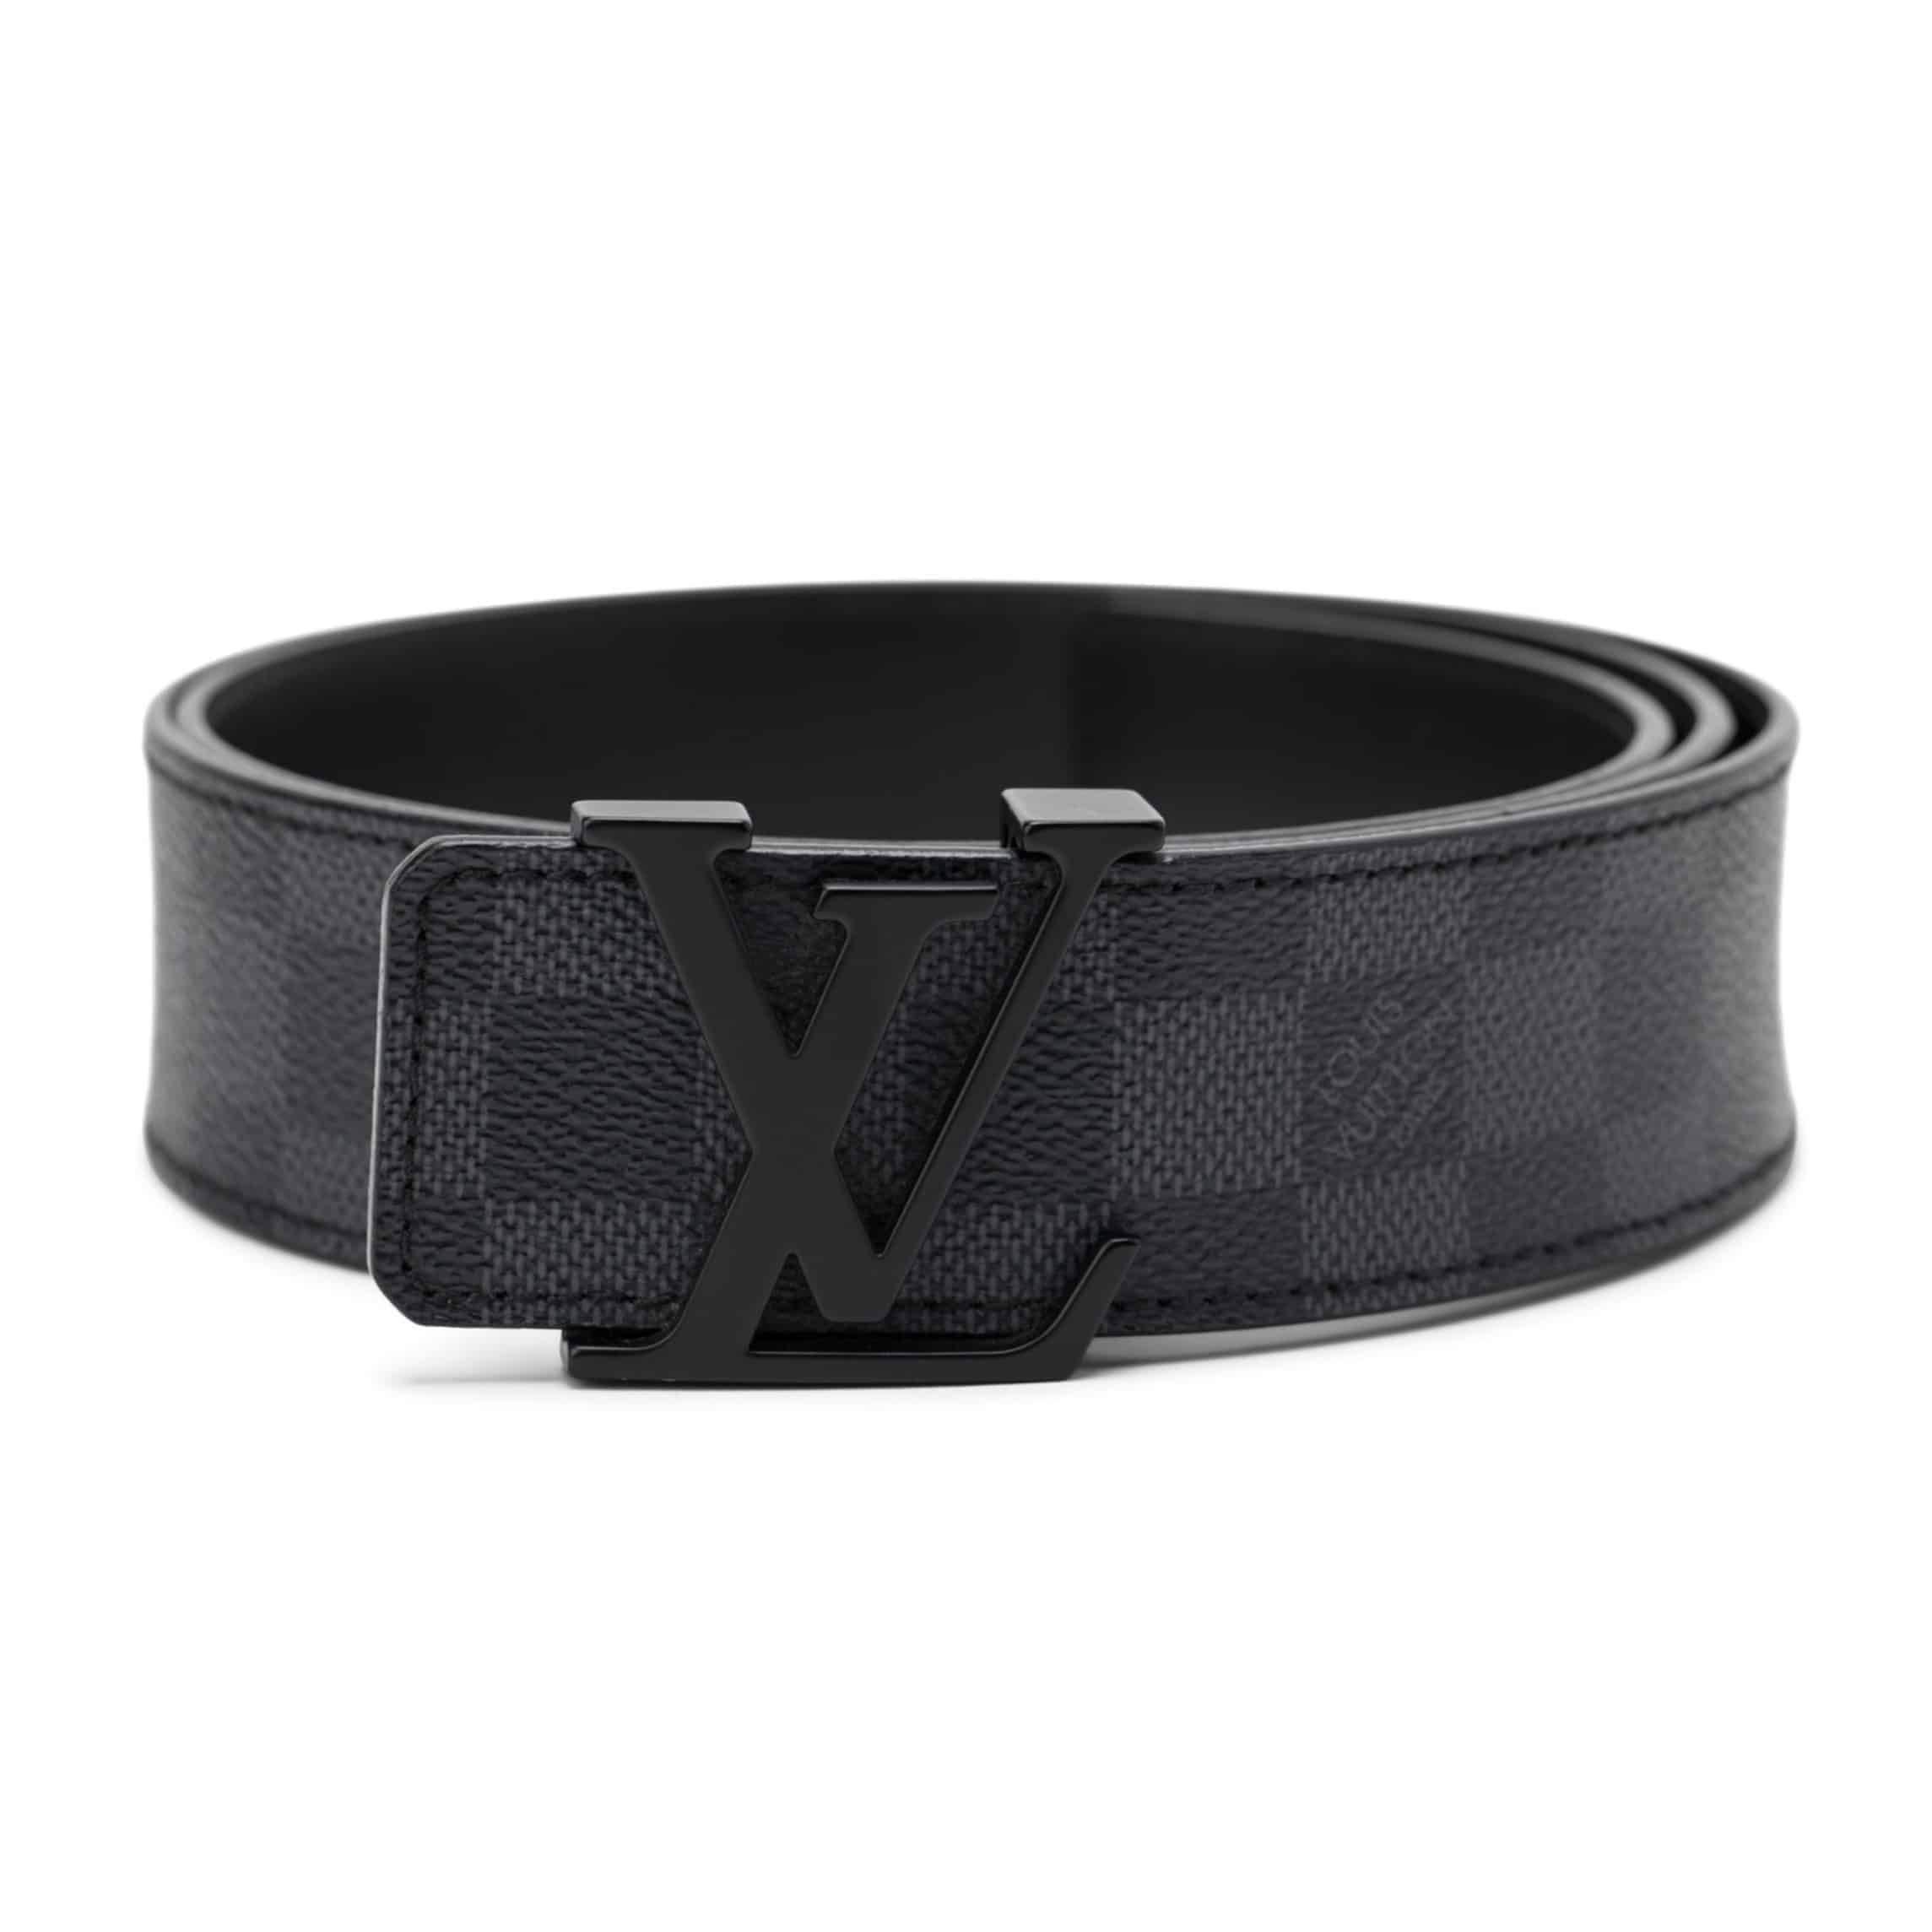 LOUIS VUITTON DAMIER EBENE LV INITIALES BELT - B31 - REPGOD.ORG/IS -  Trusted Replica Products - ReplicaGods - REPGODS.ORG